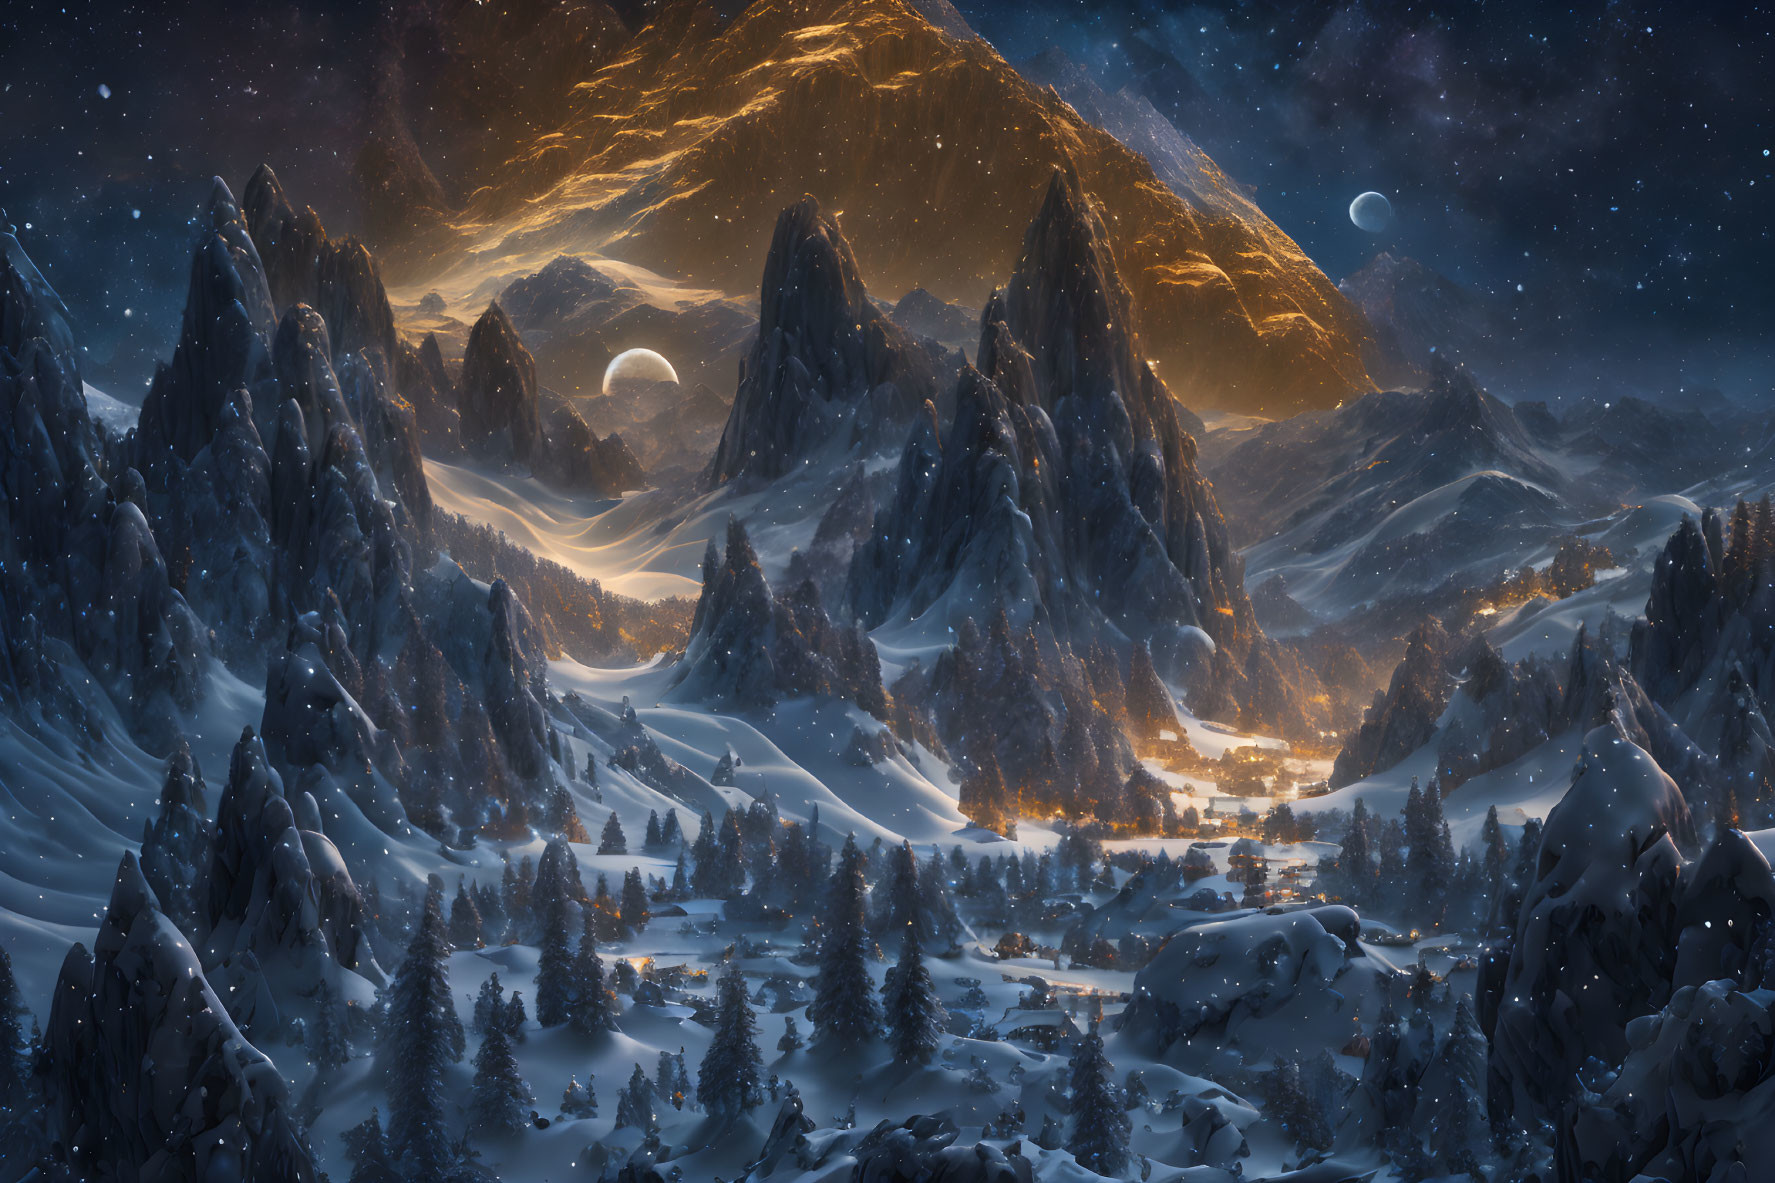 Snowy Mountain Night Landscape with Glowing Celestial Body and Tranquil Village